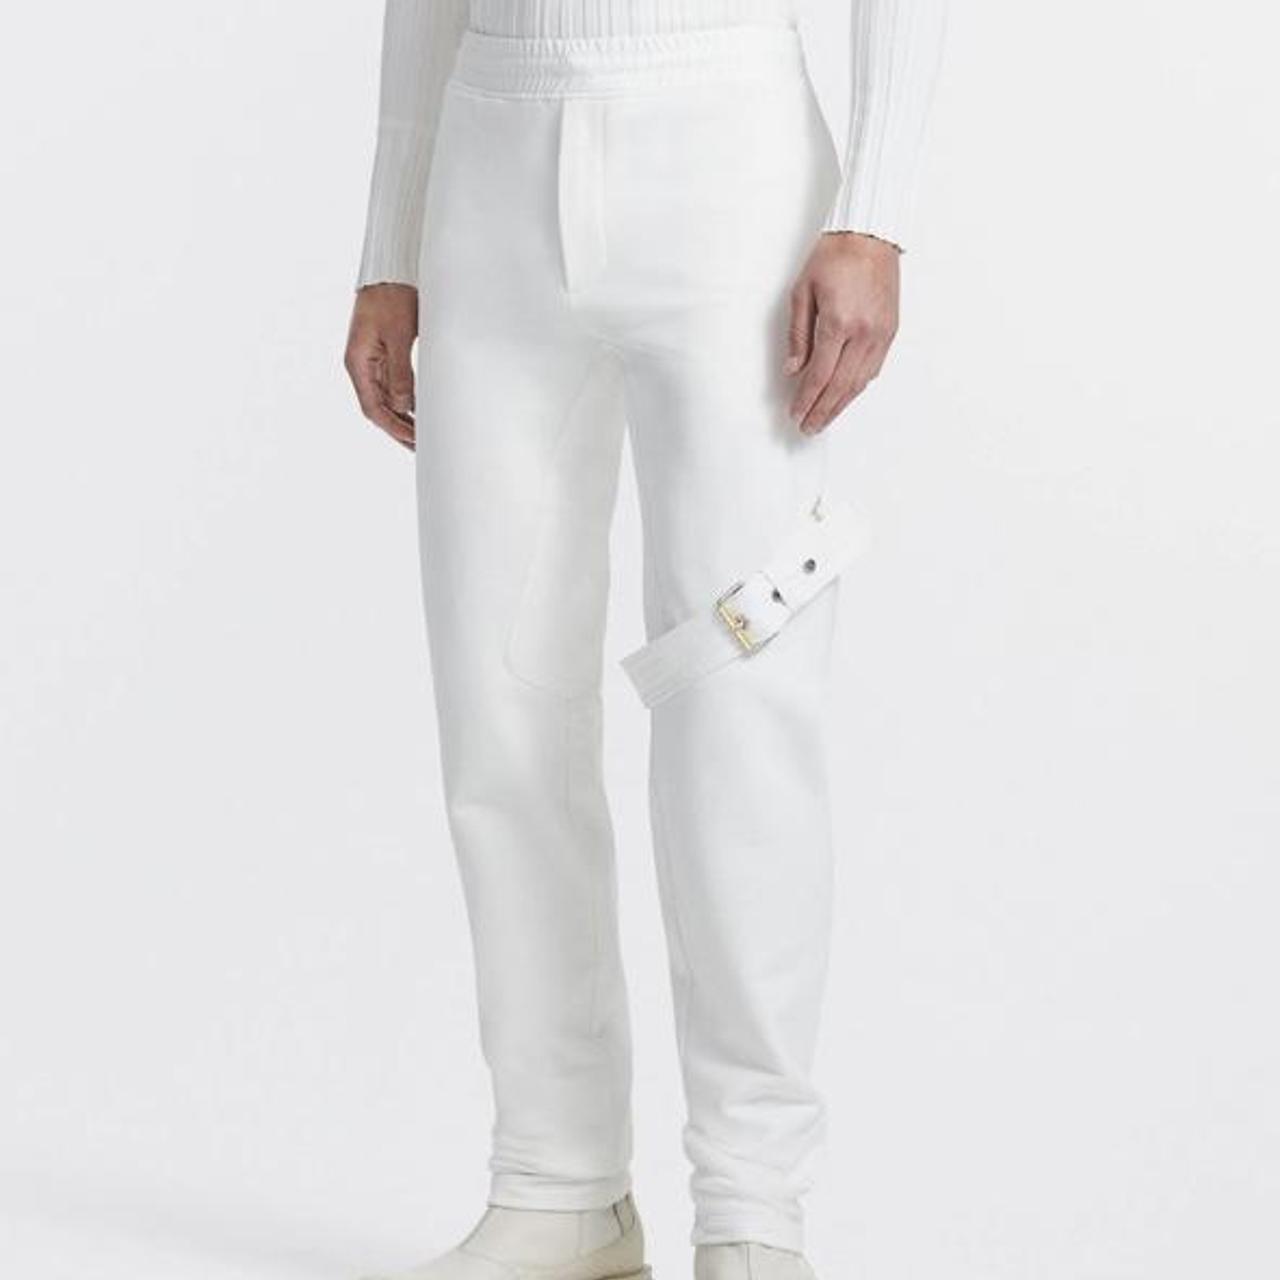 Dion Lee White Harness Sweatpants. Sold out on... - Depop